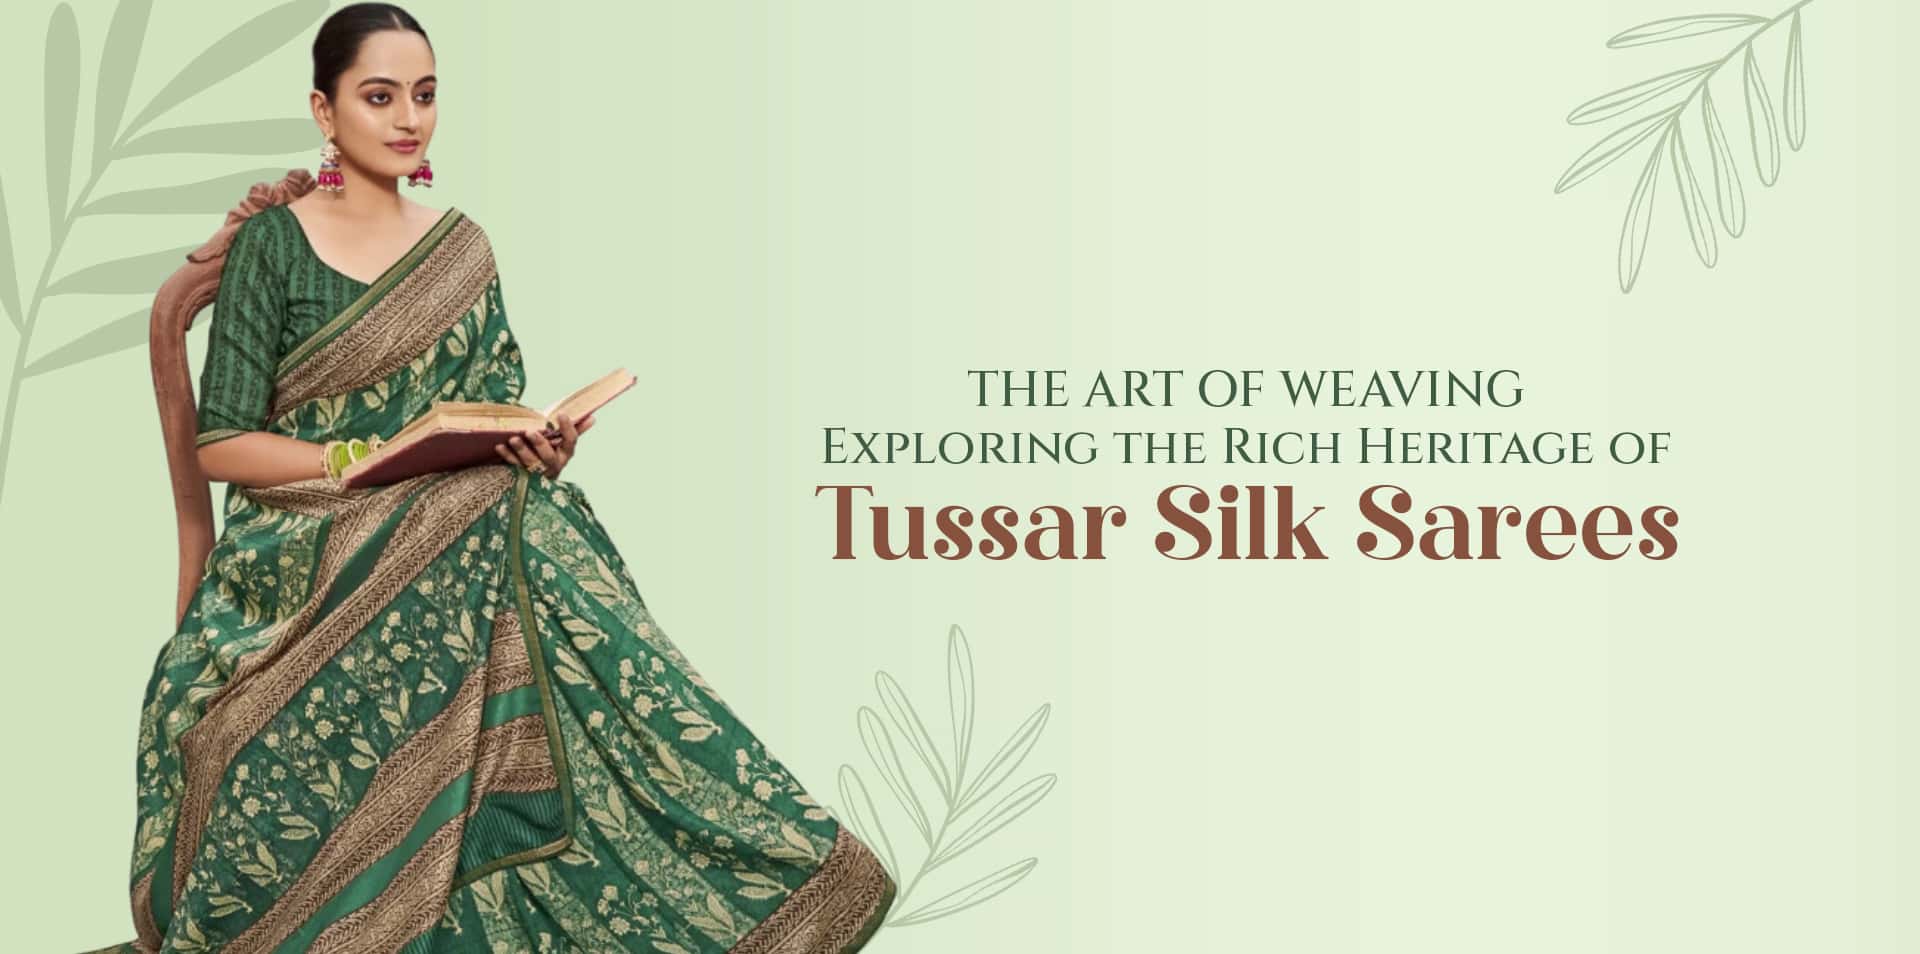 The Art of Weaving: Exploring Rich Heritage of the Tussar Silk Sarees